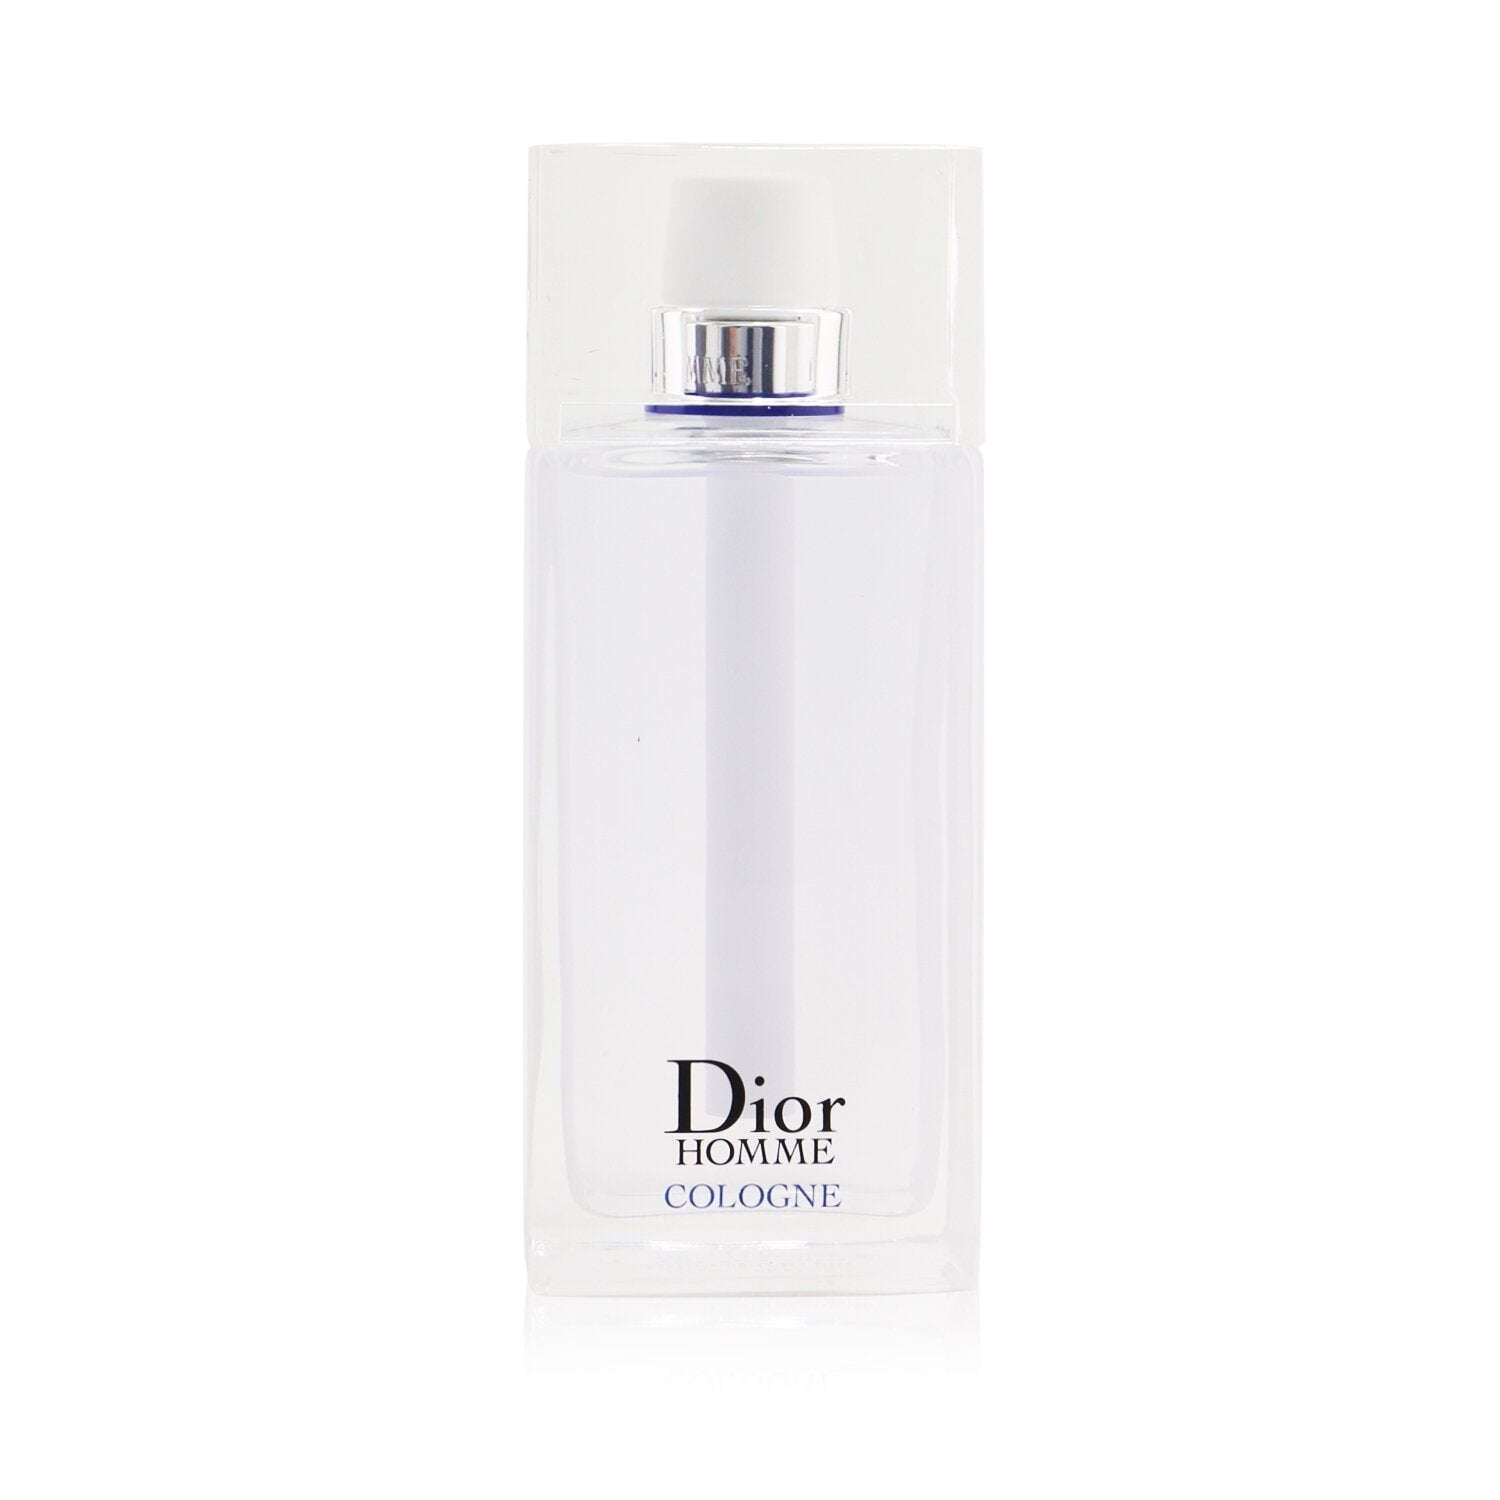 Dior Homme Intense Cologne by Christian Dior  FragranceXcom